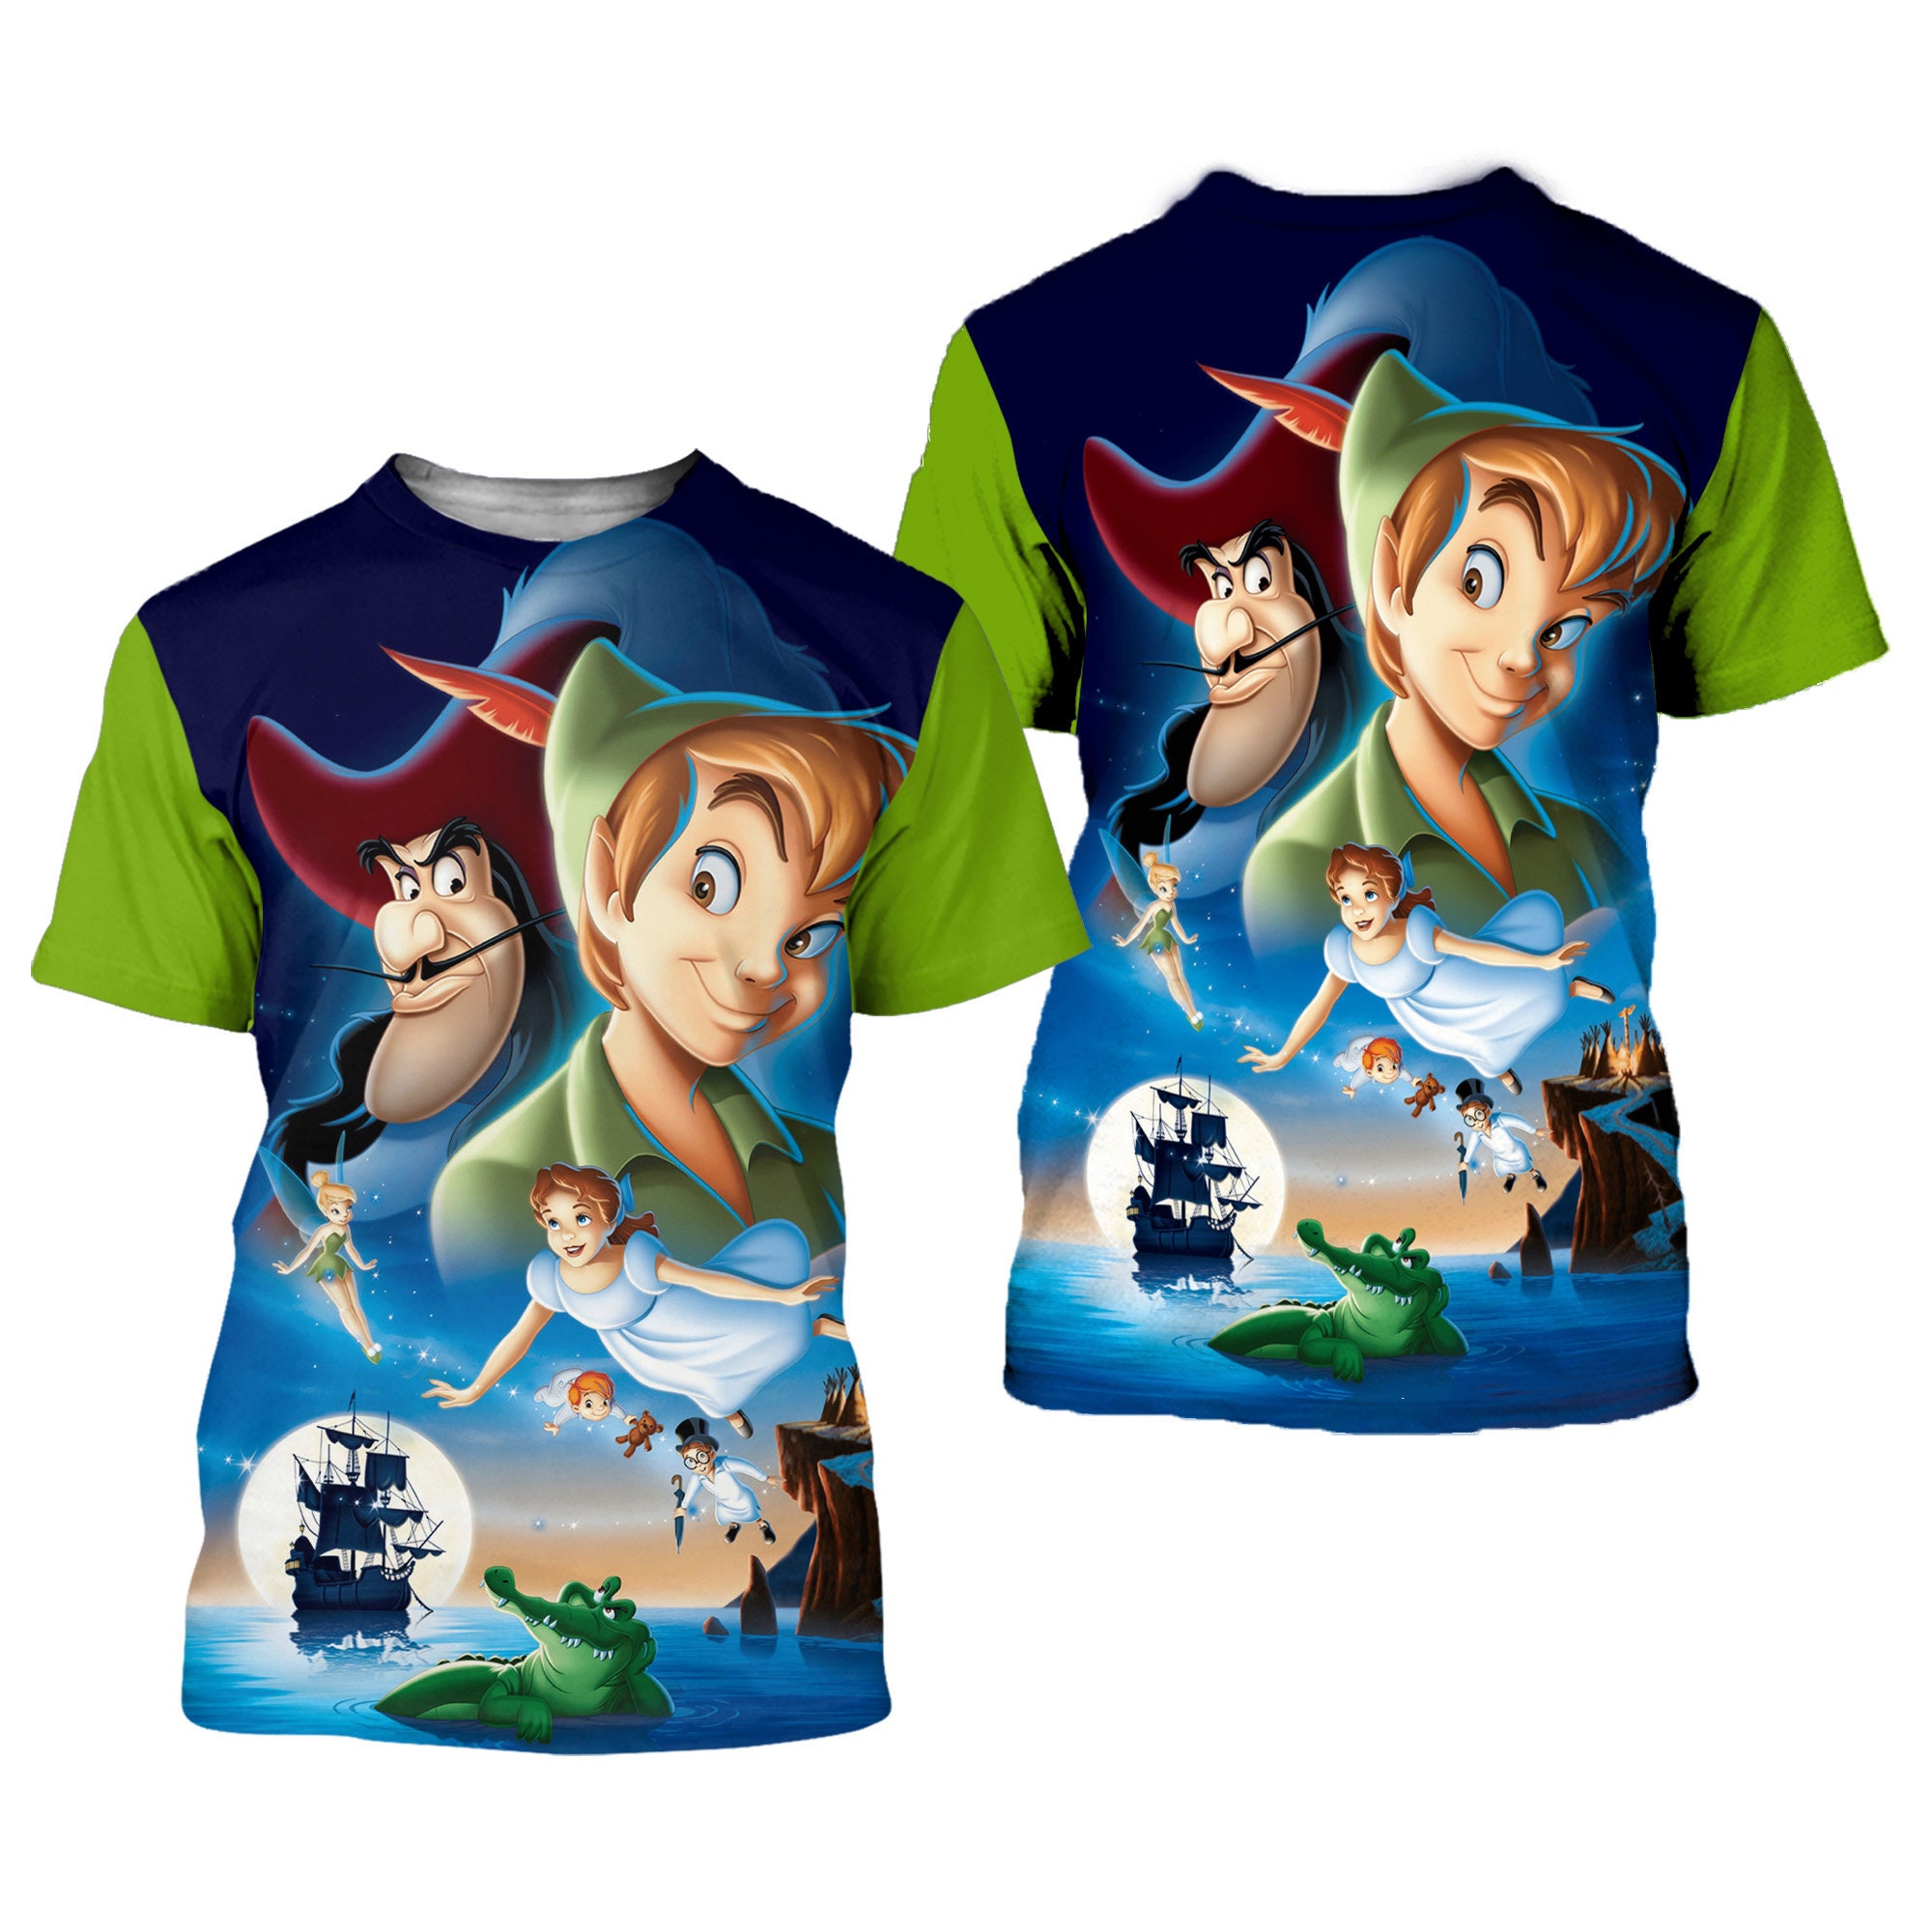 Discover Peter Pan Green Button Overalls Patterns Disney T-shirts